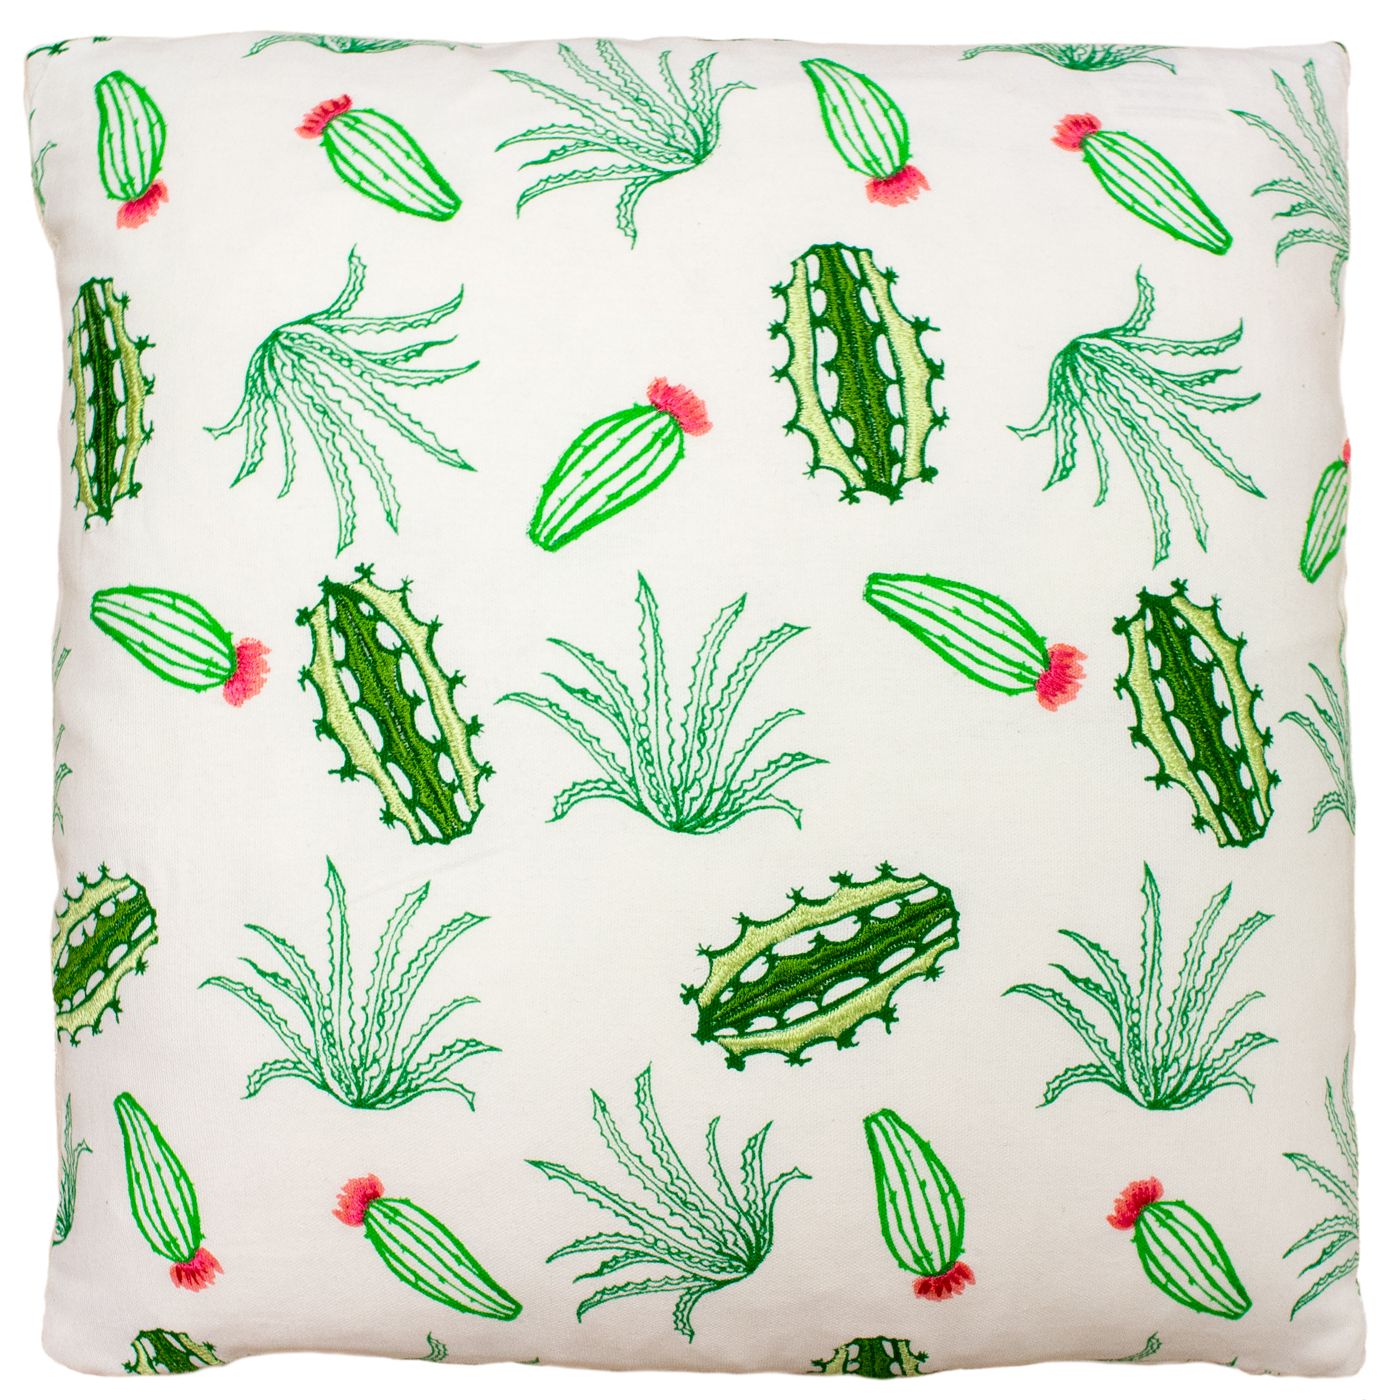 The Desert Cactus cushion from Paoletti will make your home as pretty as a picture. Charming green cactus illustrations feature lovely embroidered details to add an extra special touch to this cushion.